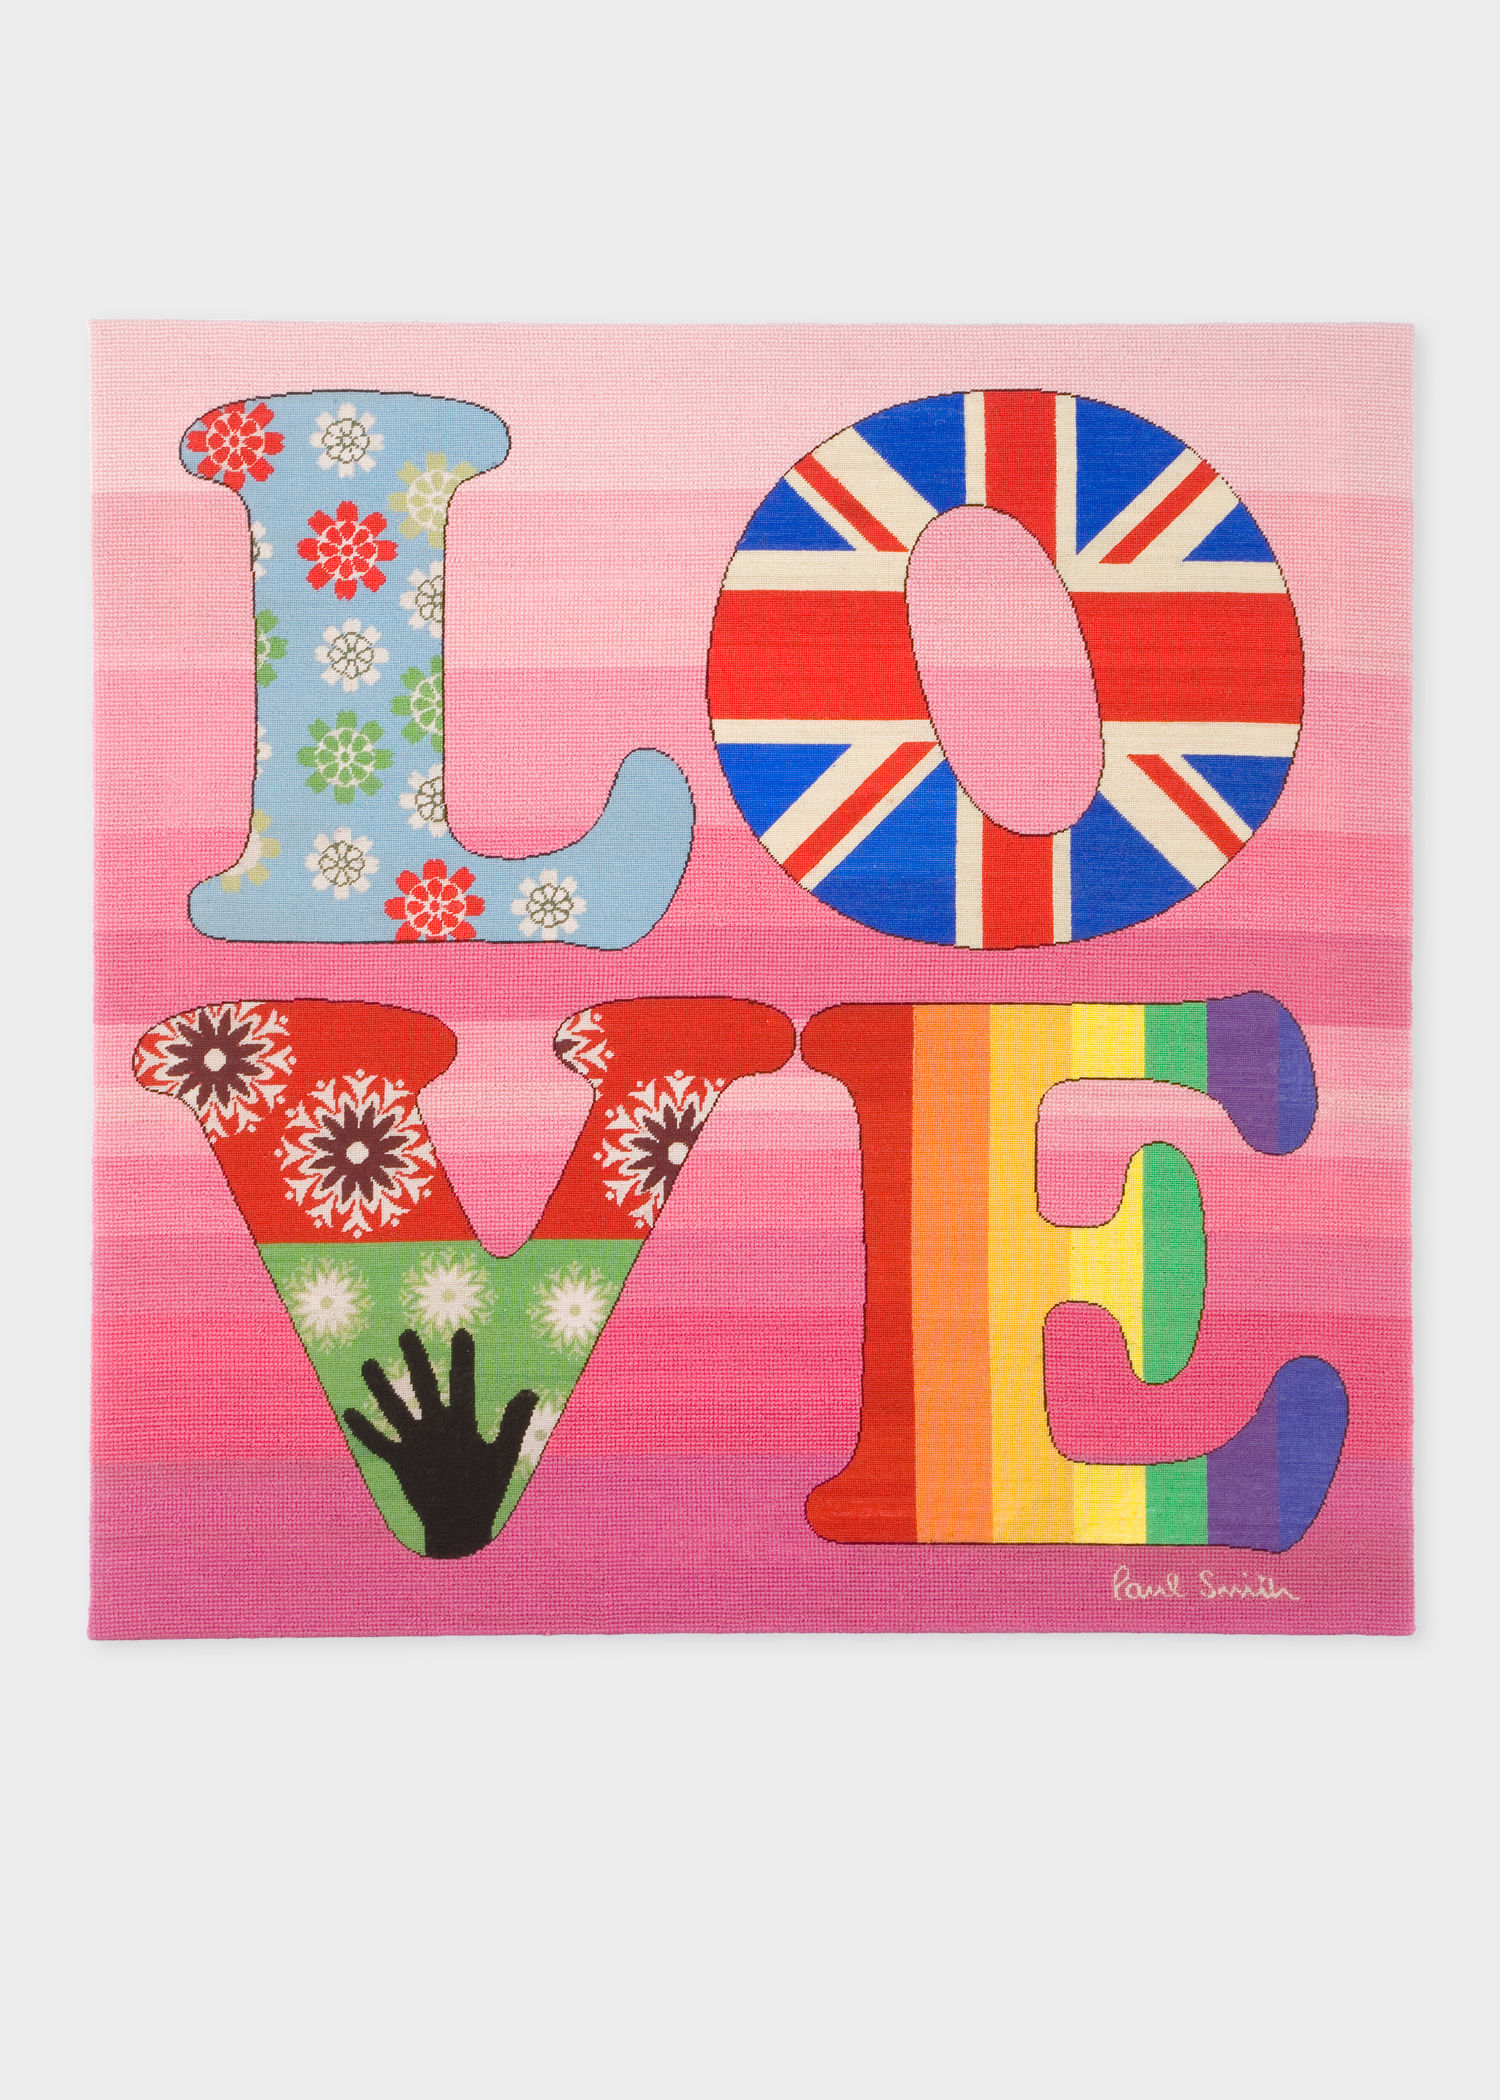 Front view - Paul Smith for The Rug Company - Pink Love Needlepoint Wallhanging